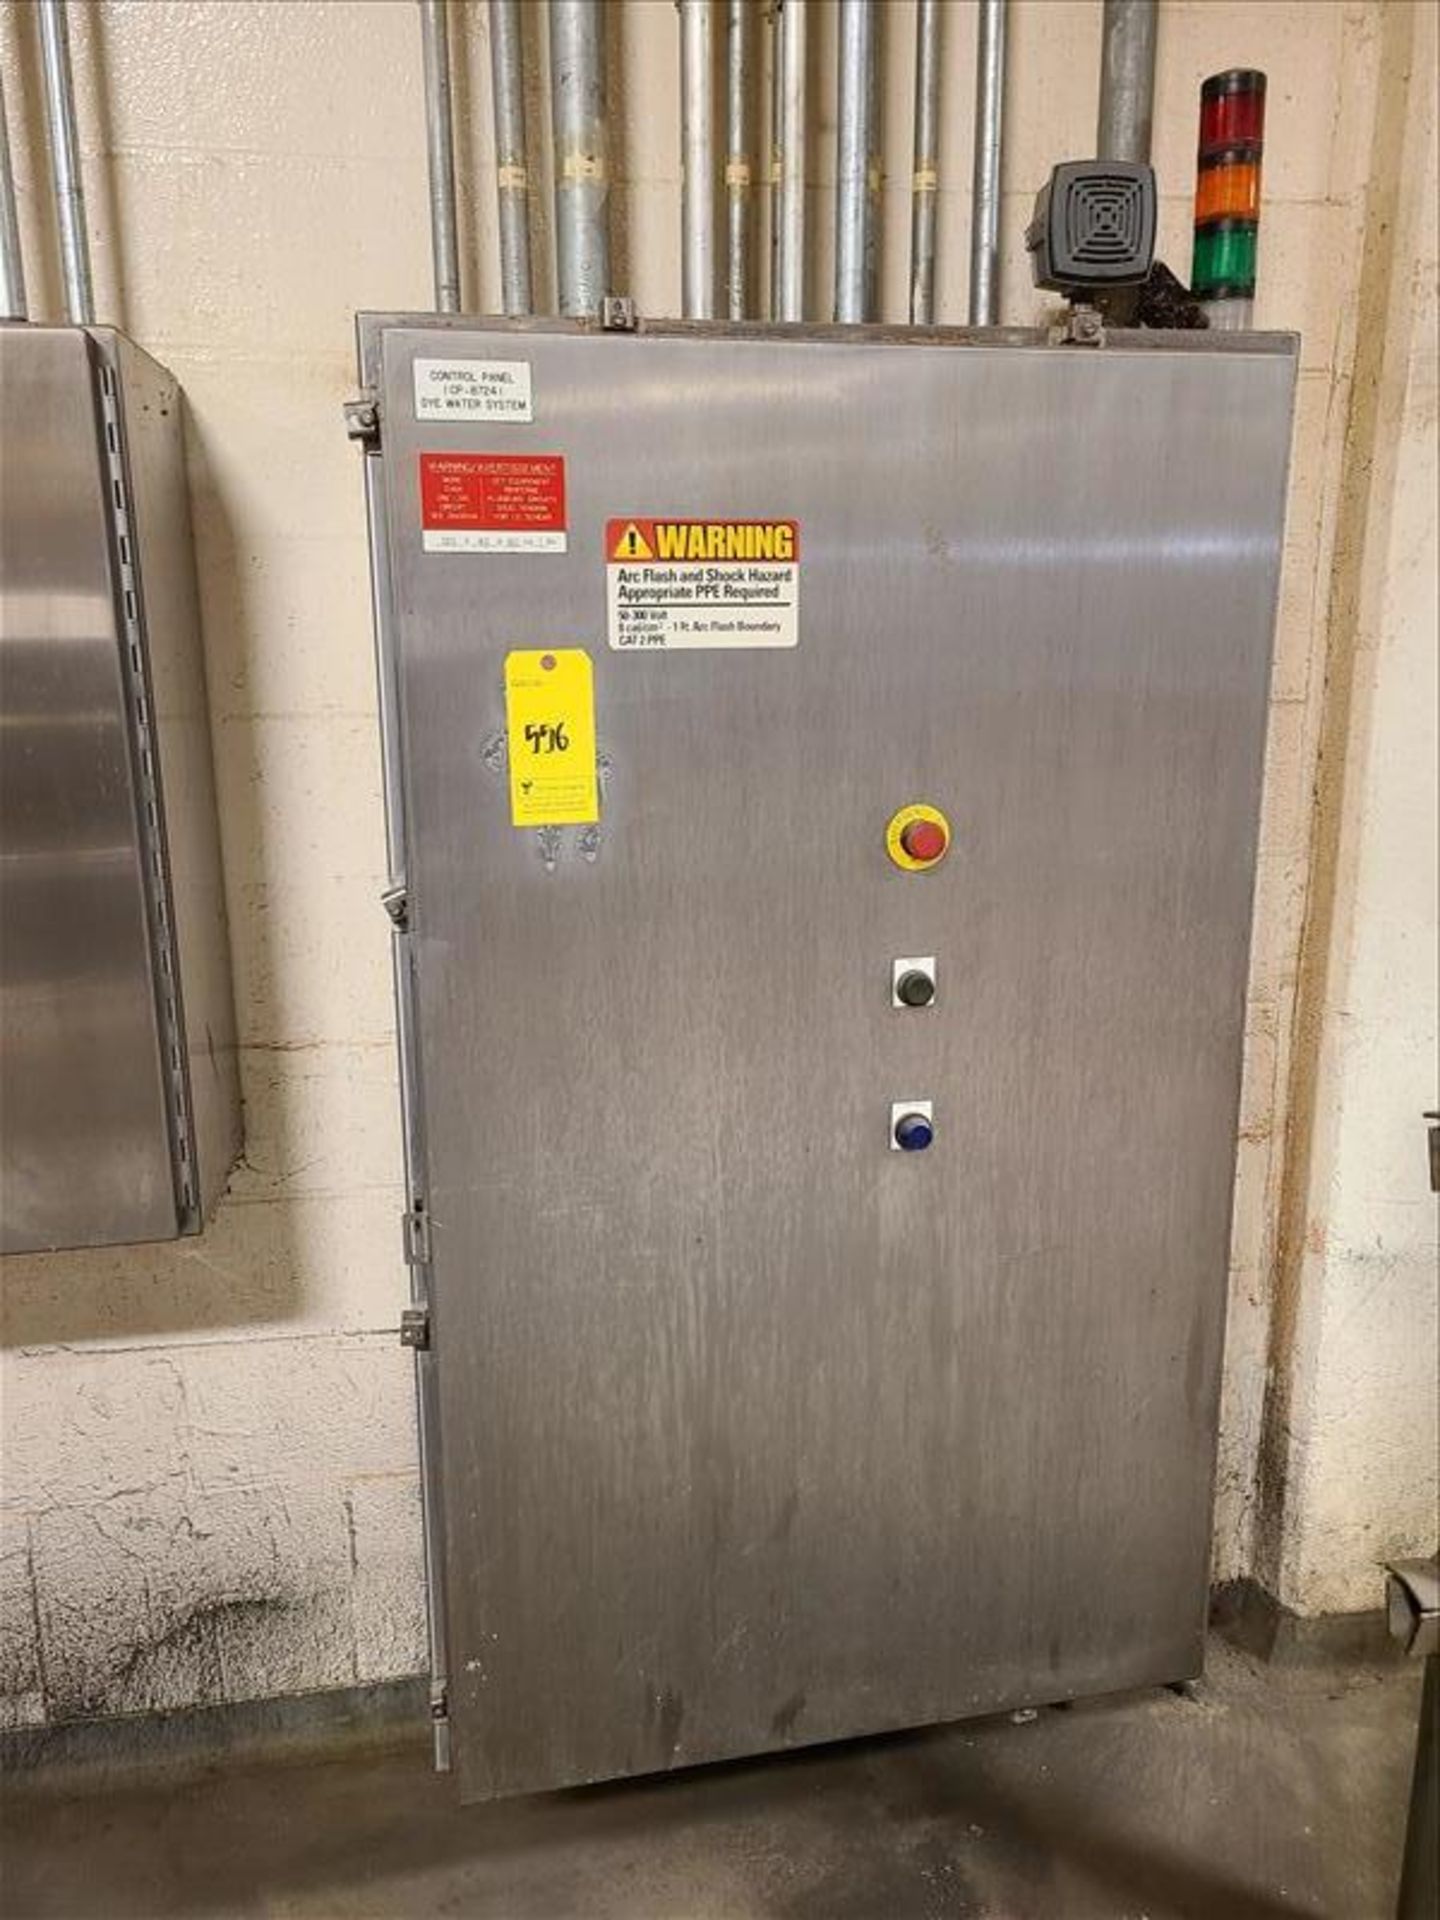 [LOT] (3) stainless control cabinet, with CPS114-20 DAO 842, CRA931-00 AV03000, DAI54300 ALO02000